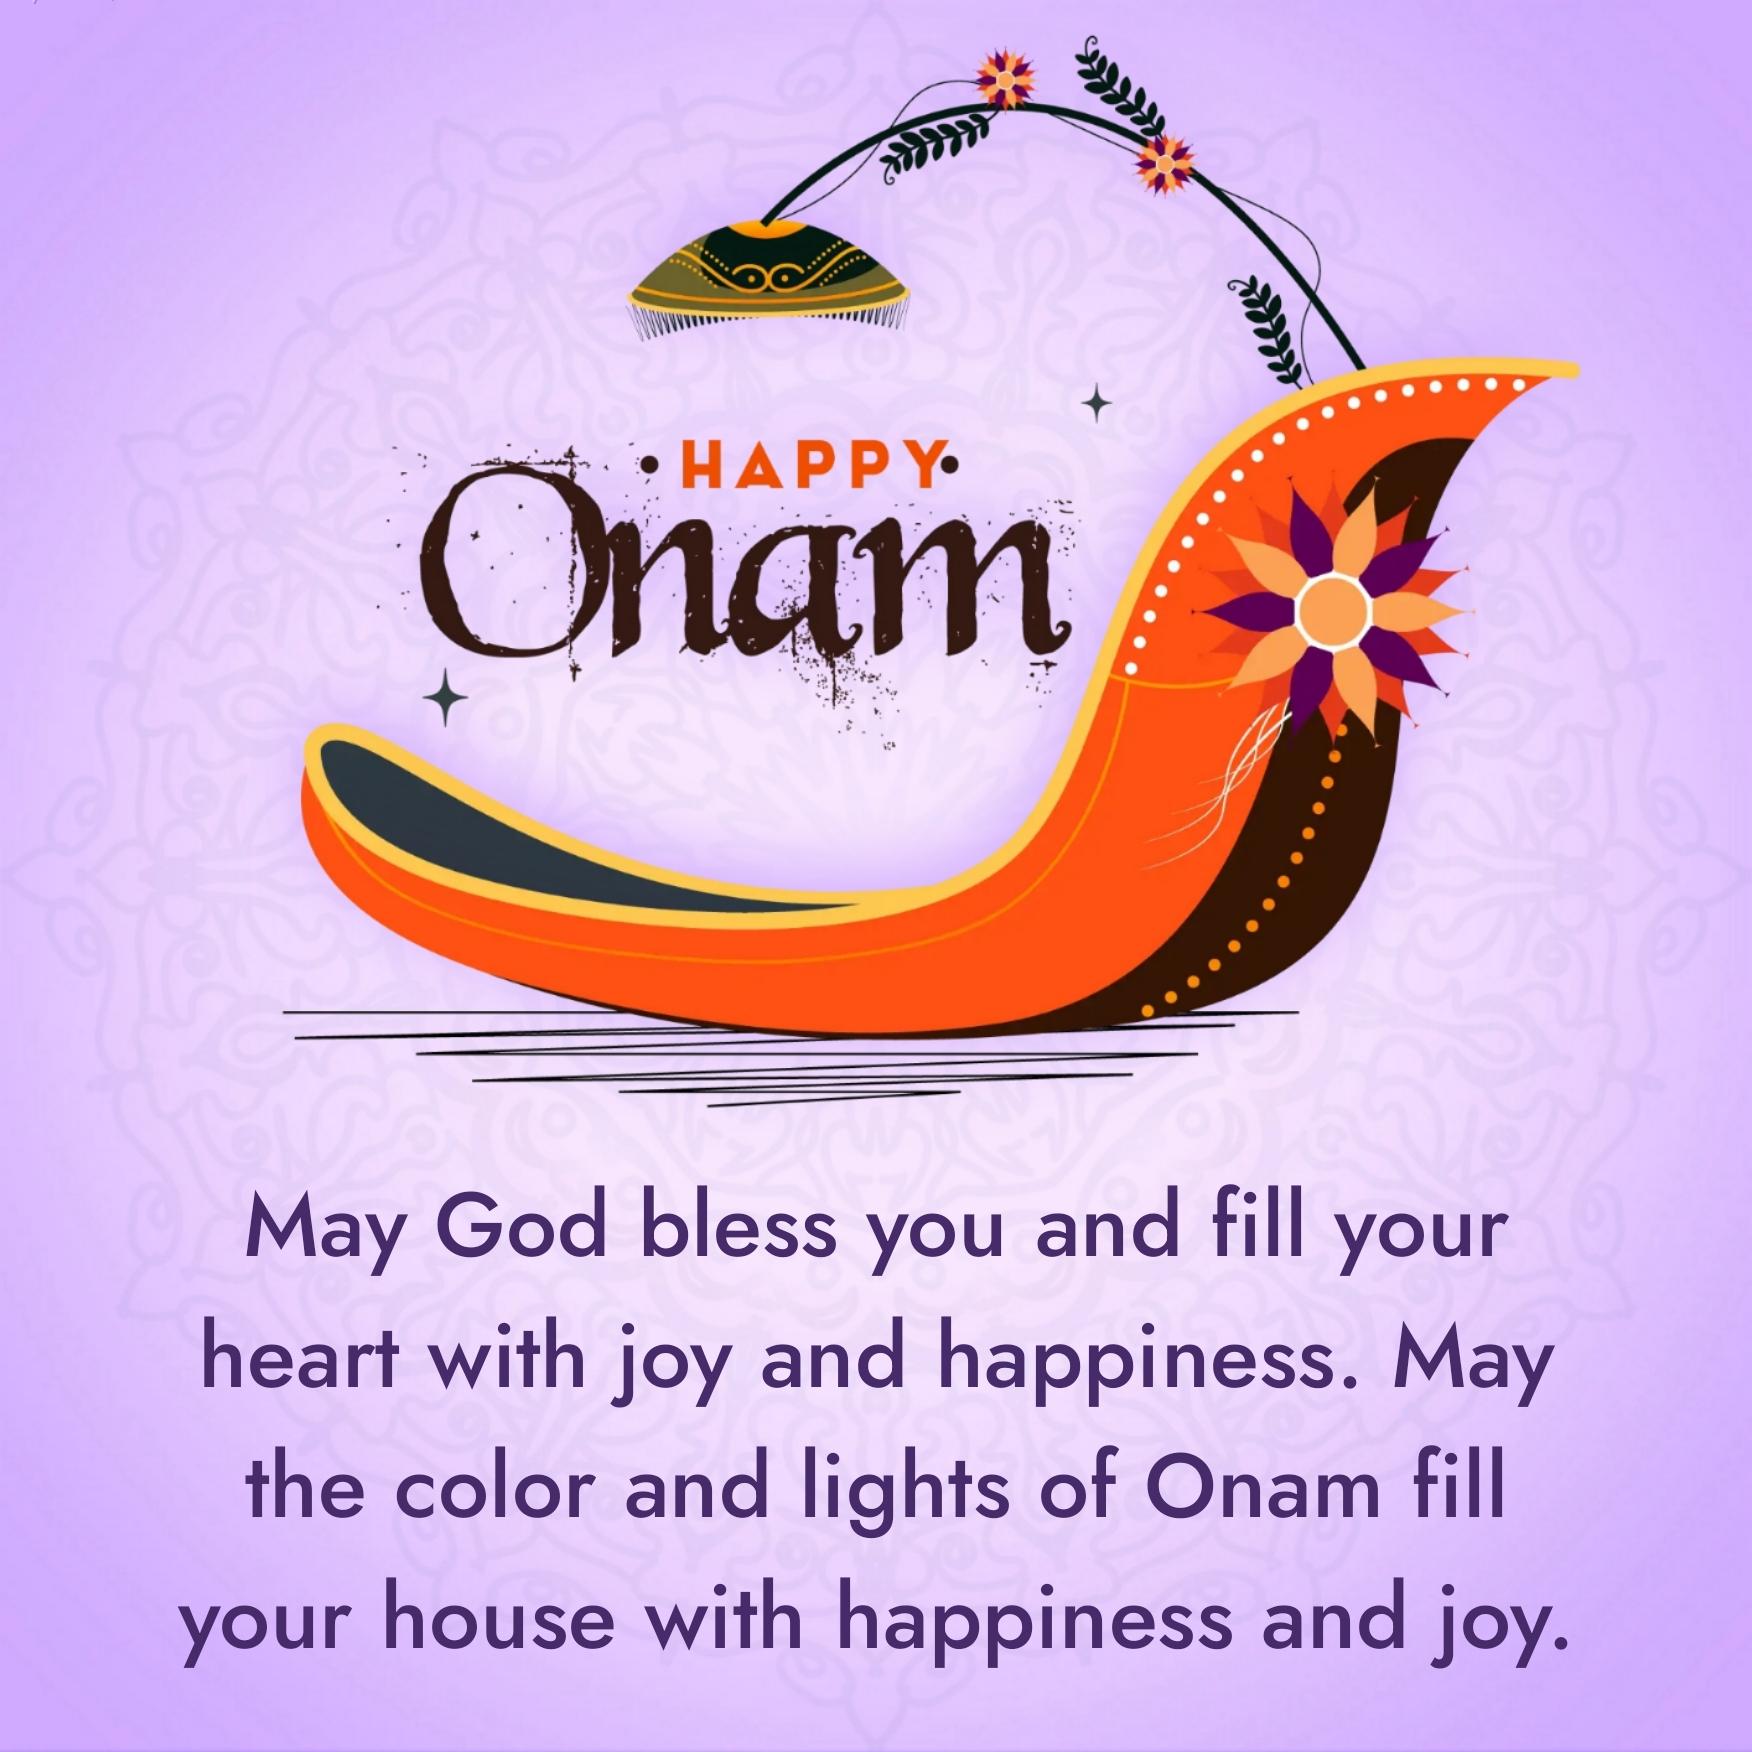 May God bless you and fill your heart with joy and happiness